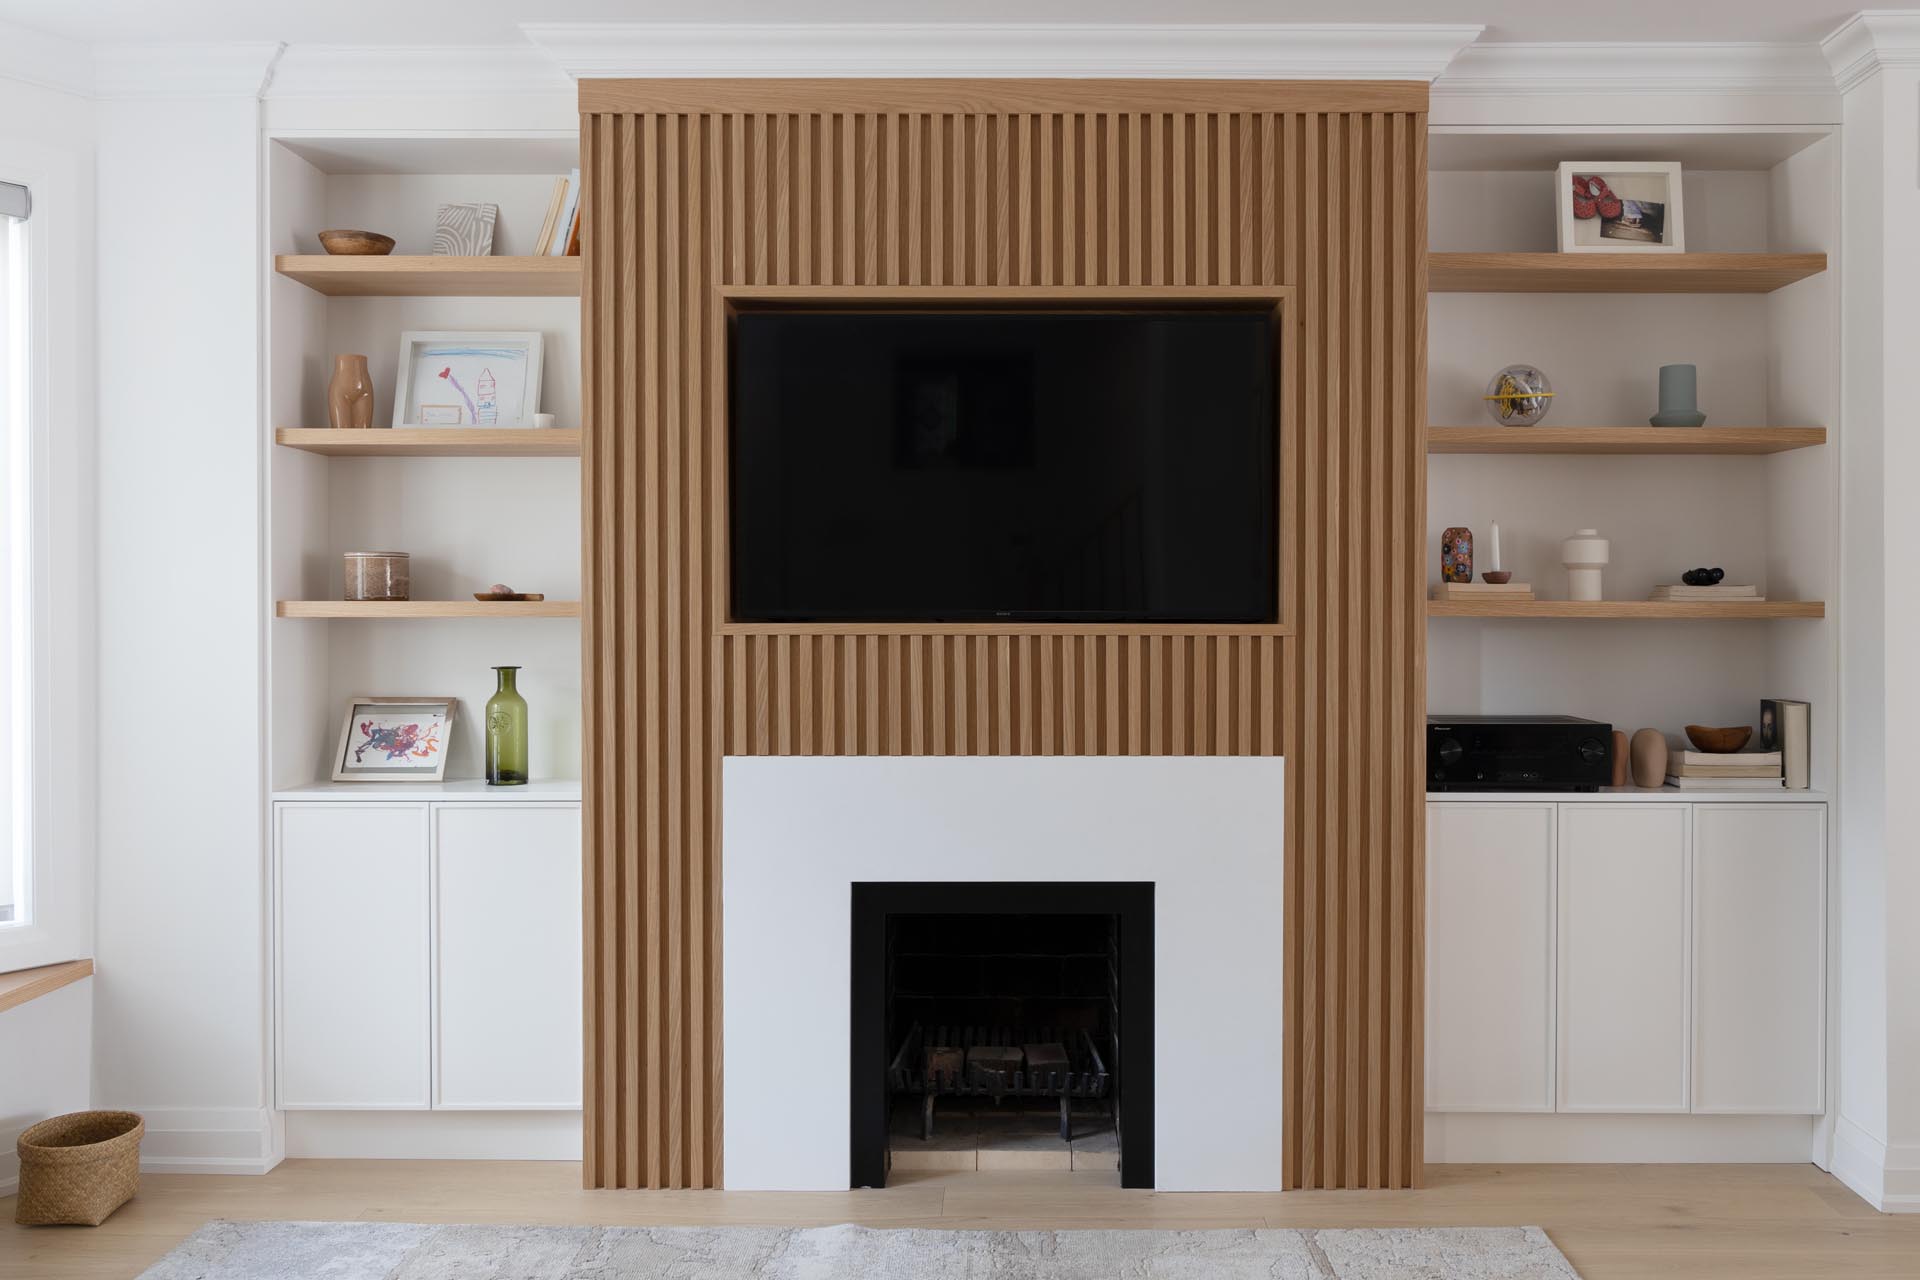 This living room wall has a Scandinavian-inspired design that includes a wood slatted wall that draws the eye, adds a sense of depth, and surrounds the television and fireplace.